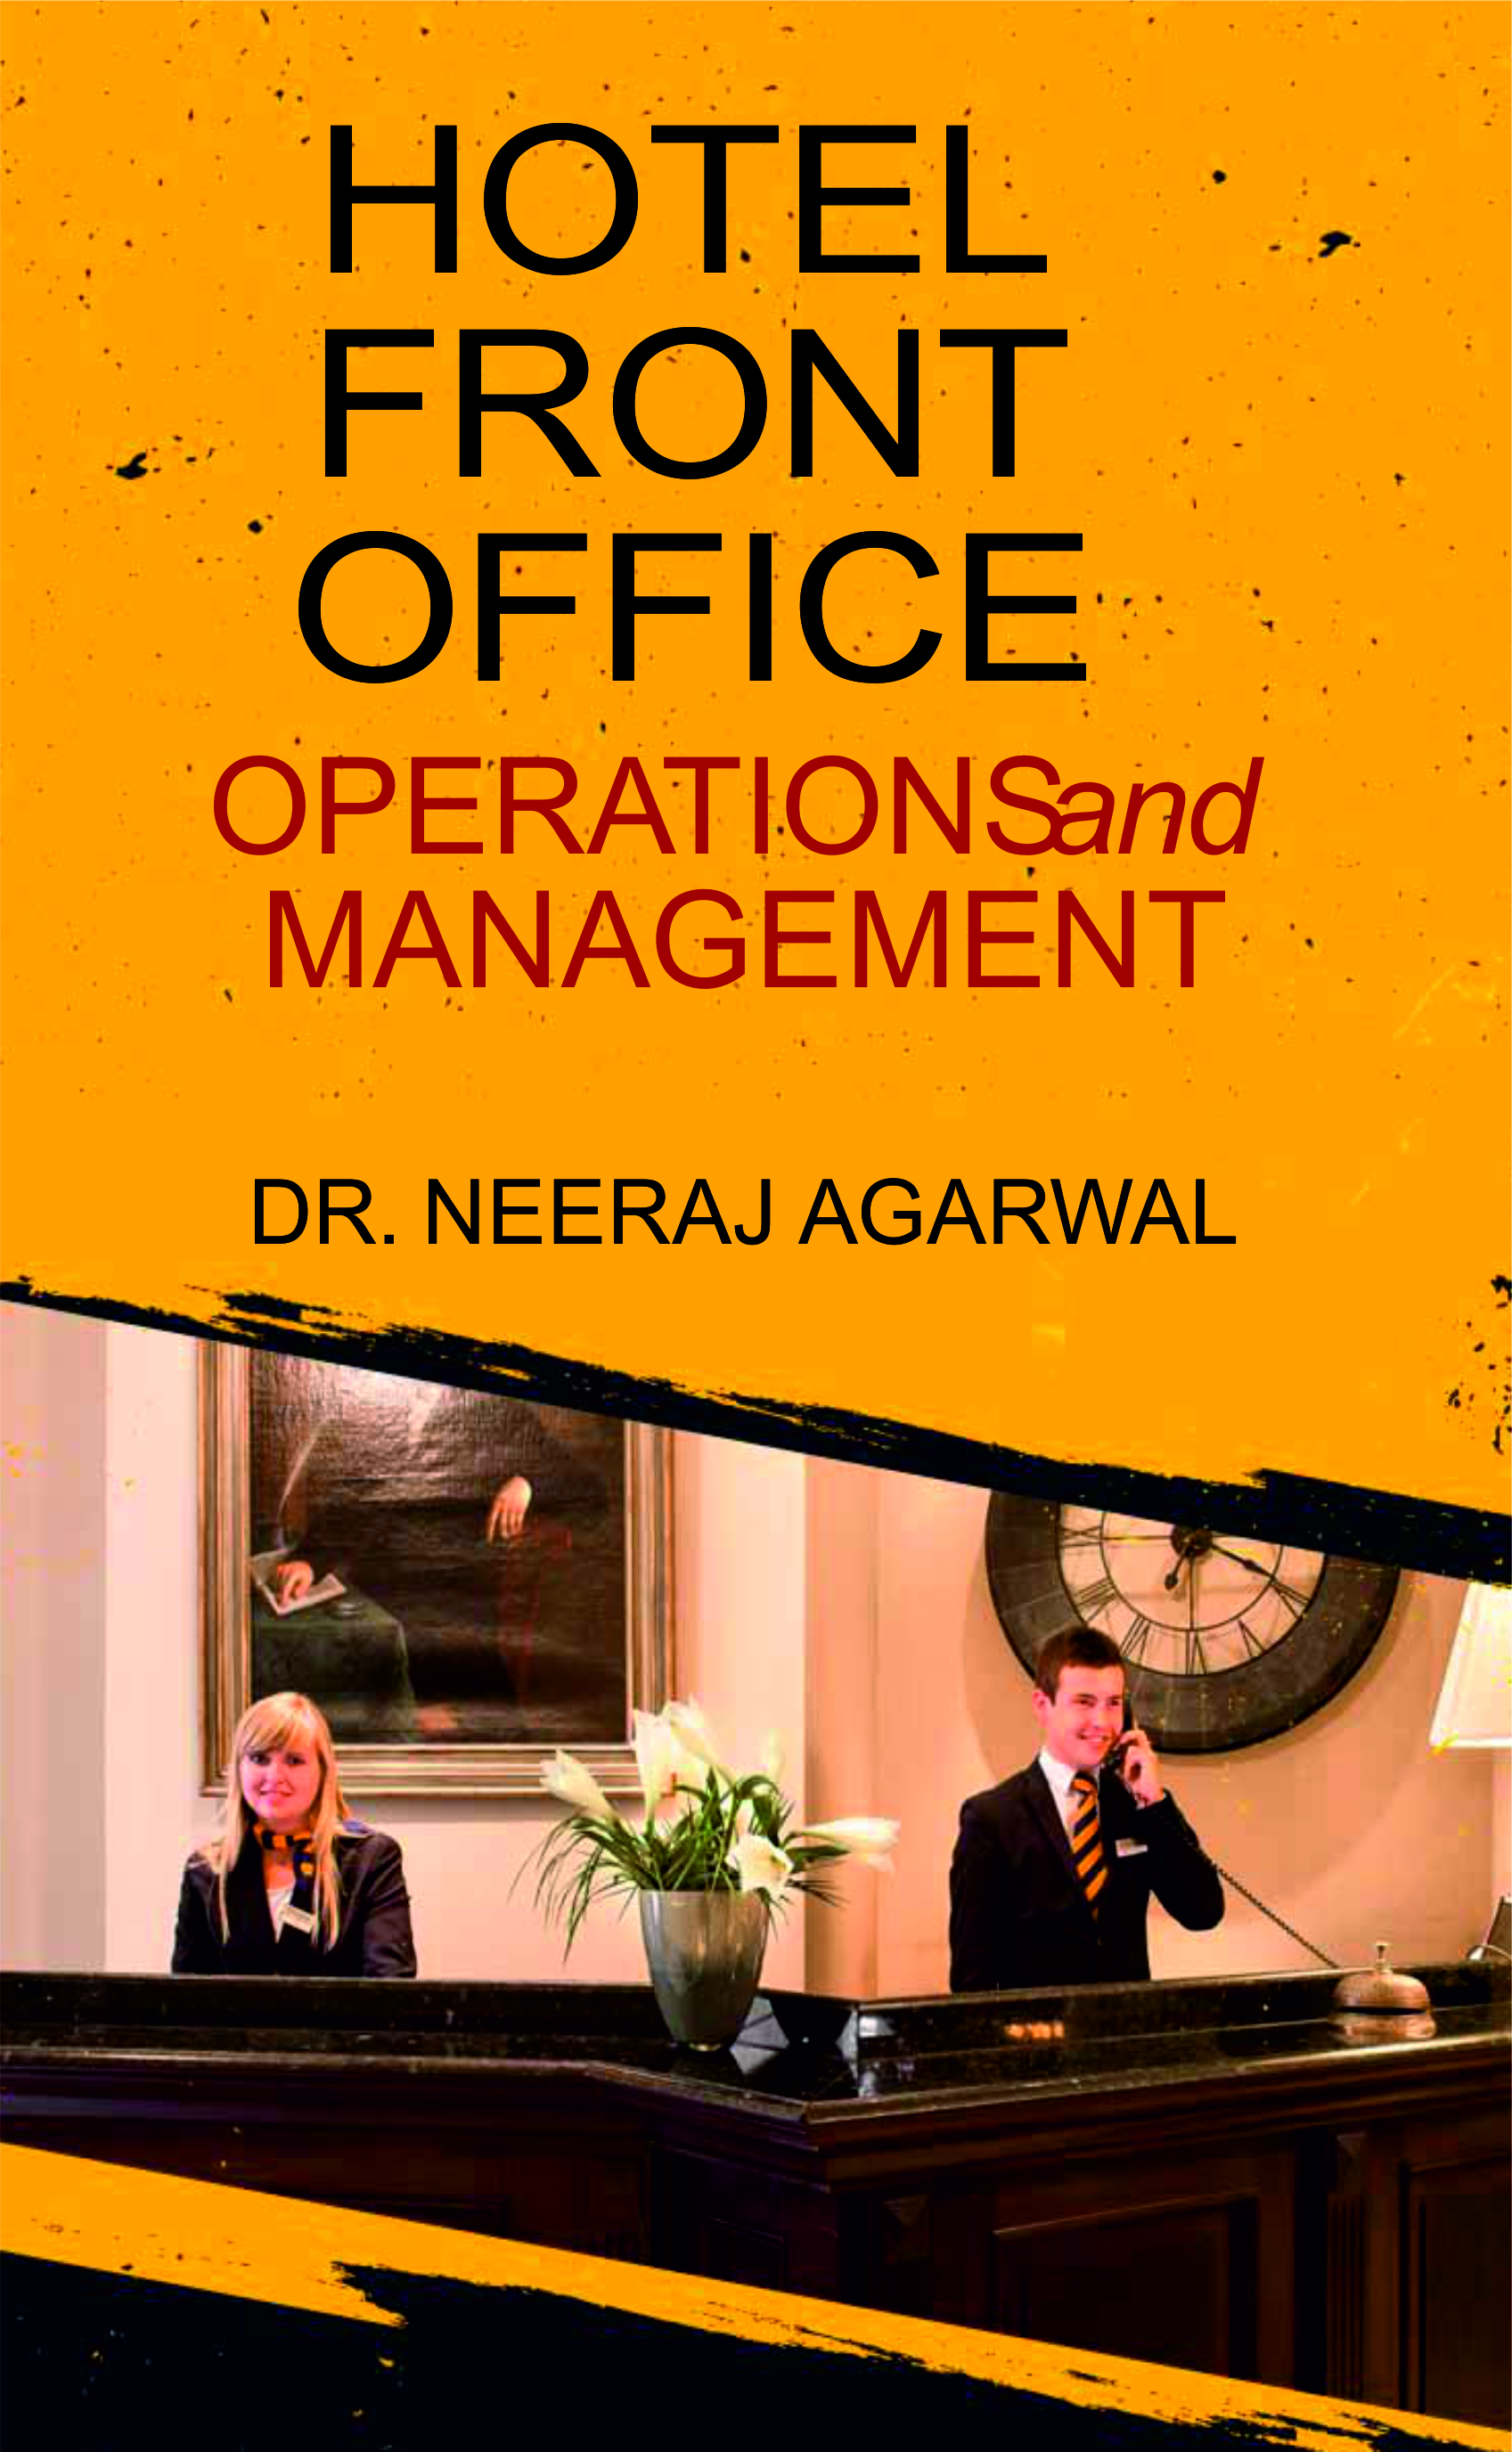 Hotel Front Office: Operations and Management